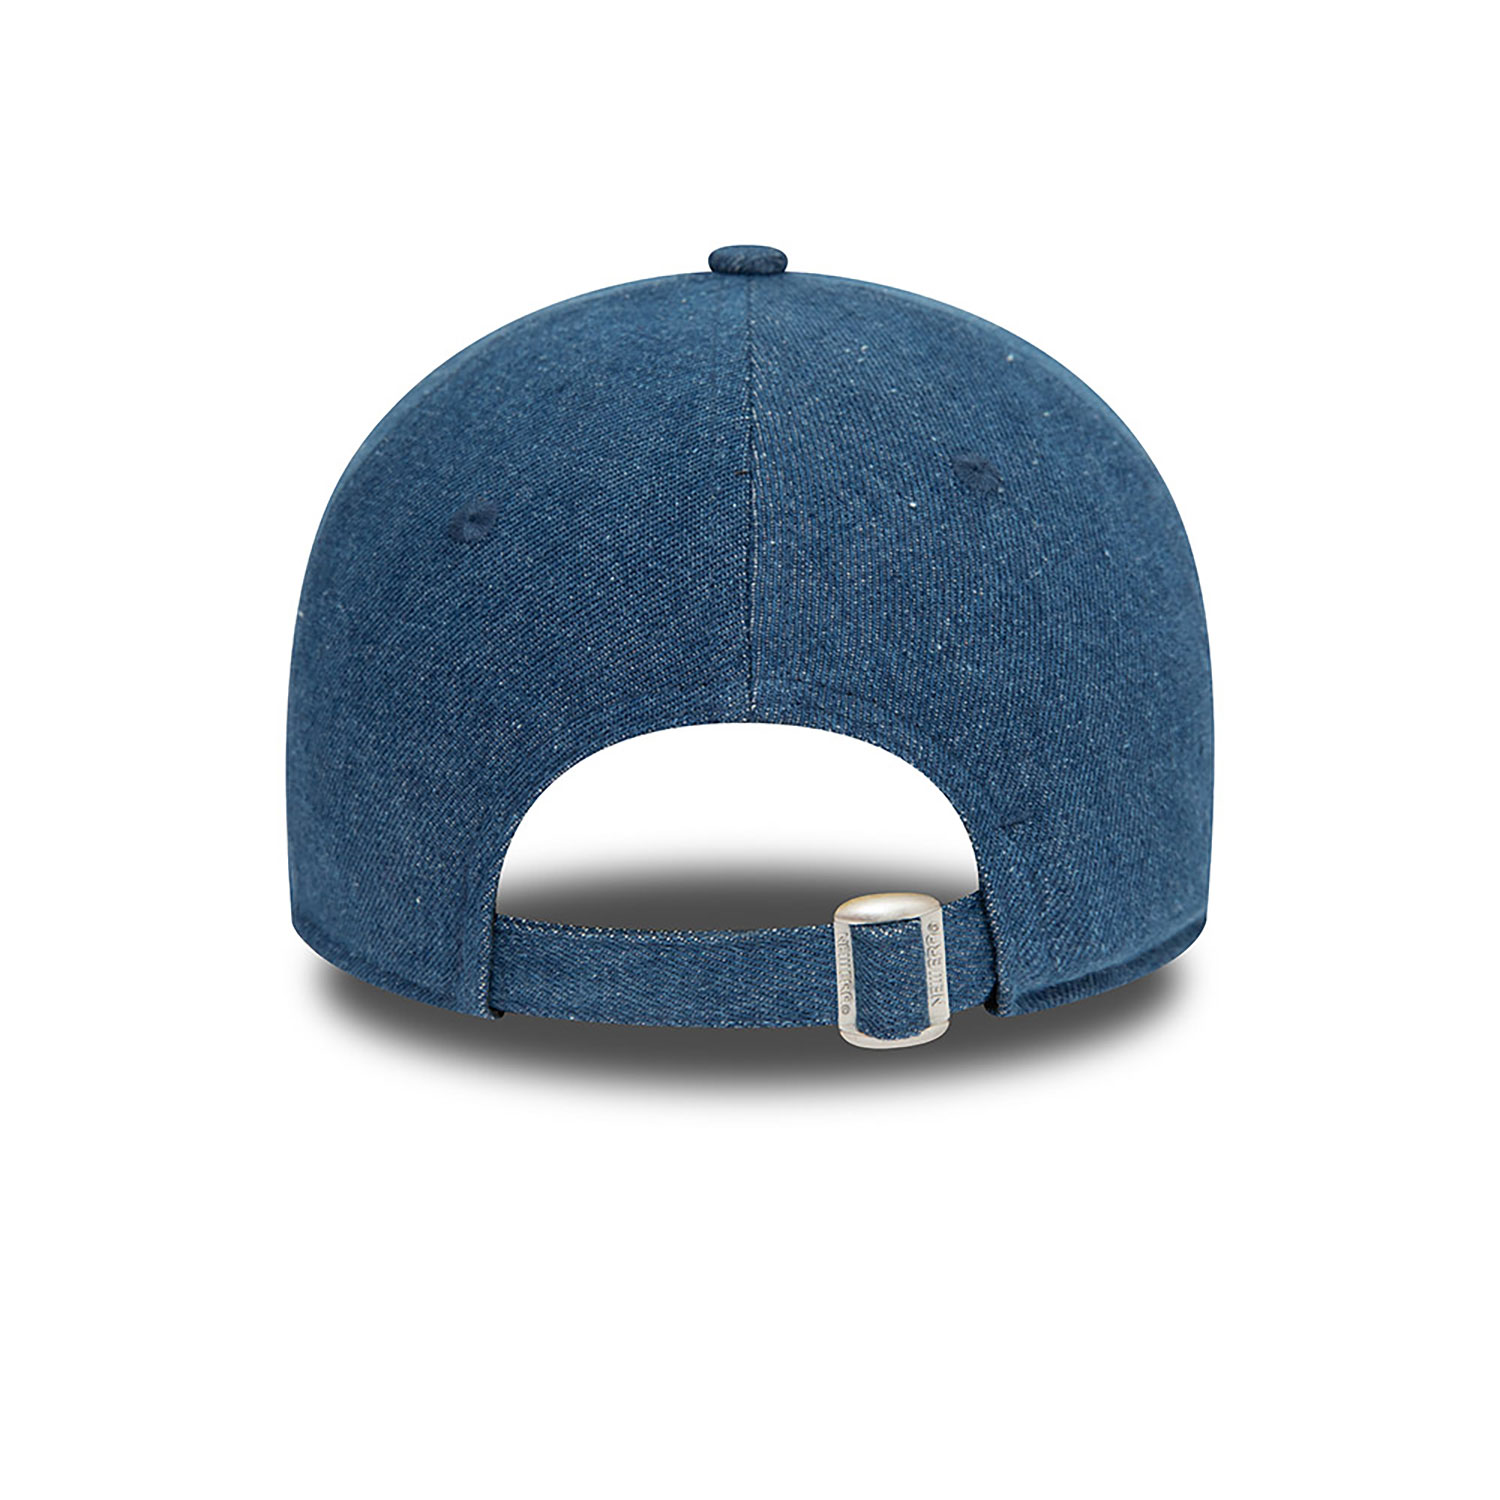 French Federation Of Rugby Womens Denim Blue 9FORTY Adjustable Cap